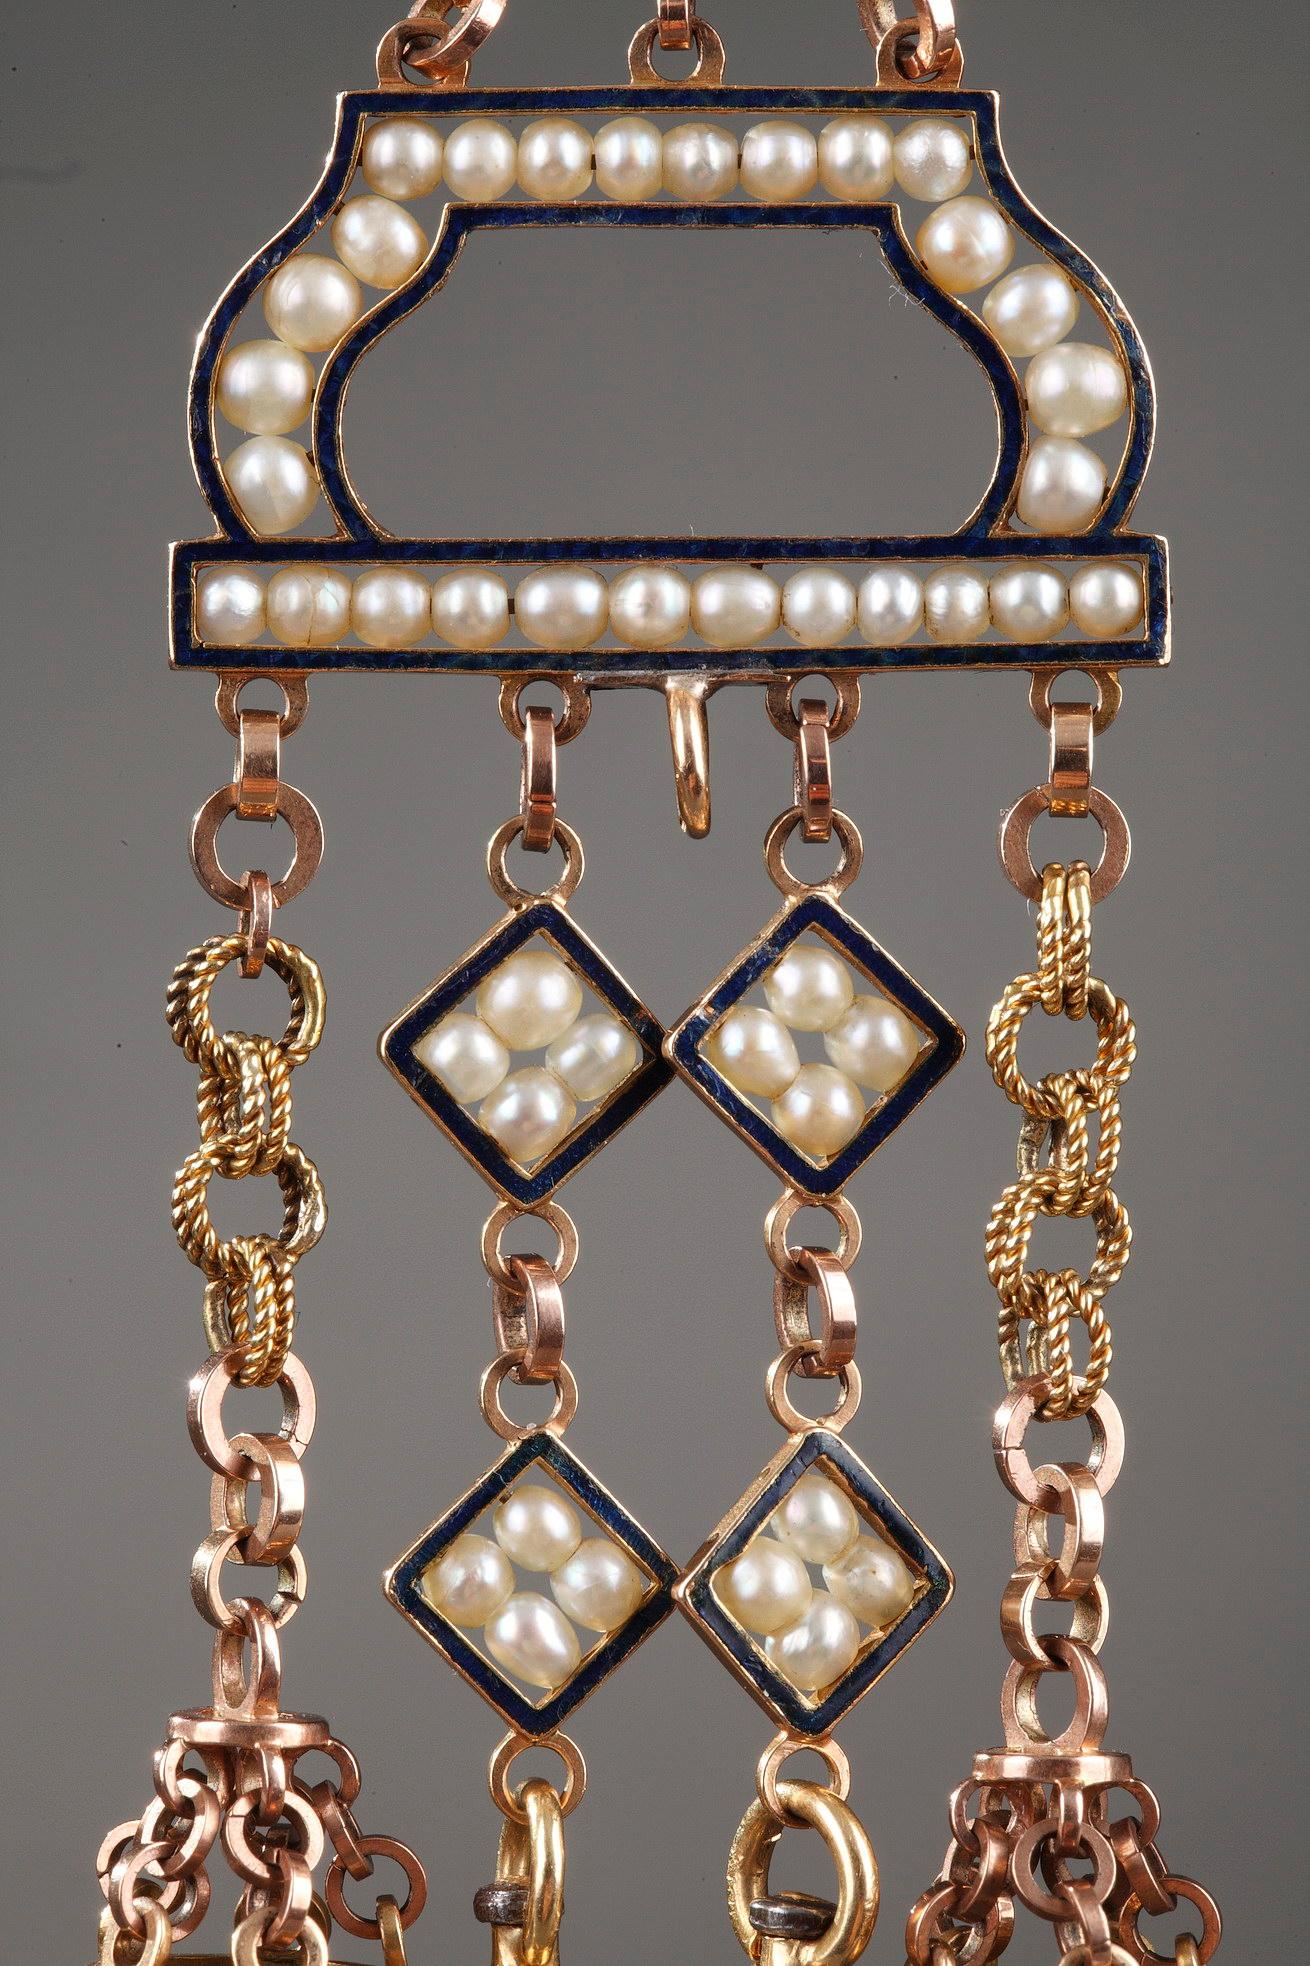 Chatelaine with Gold, Enamel and Pearls, Late 18th Century Work For Sale 2